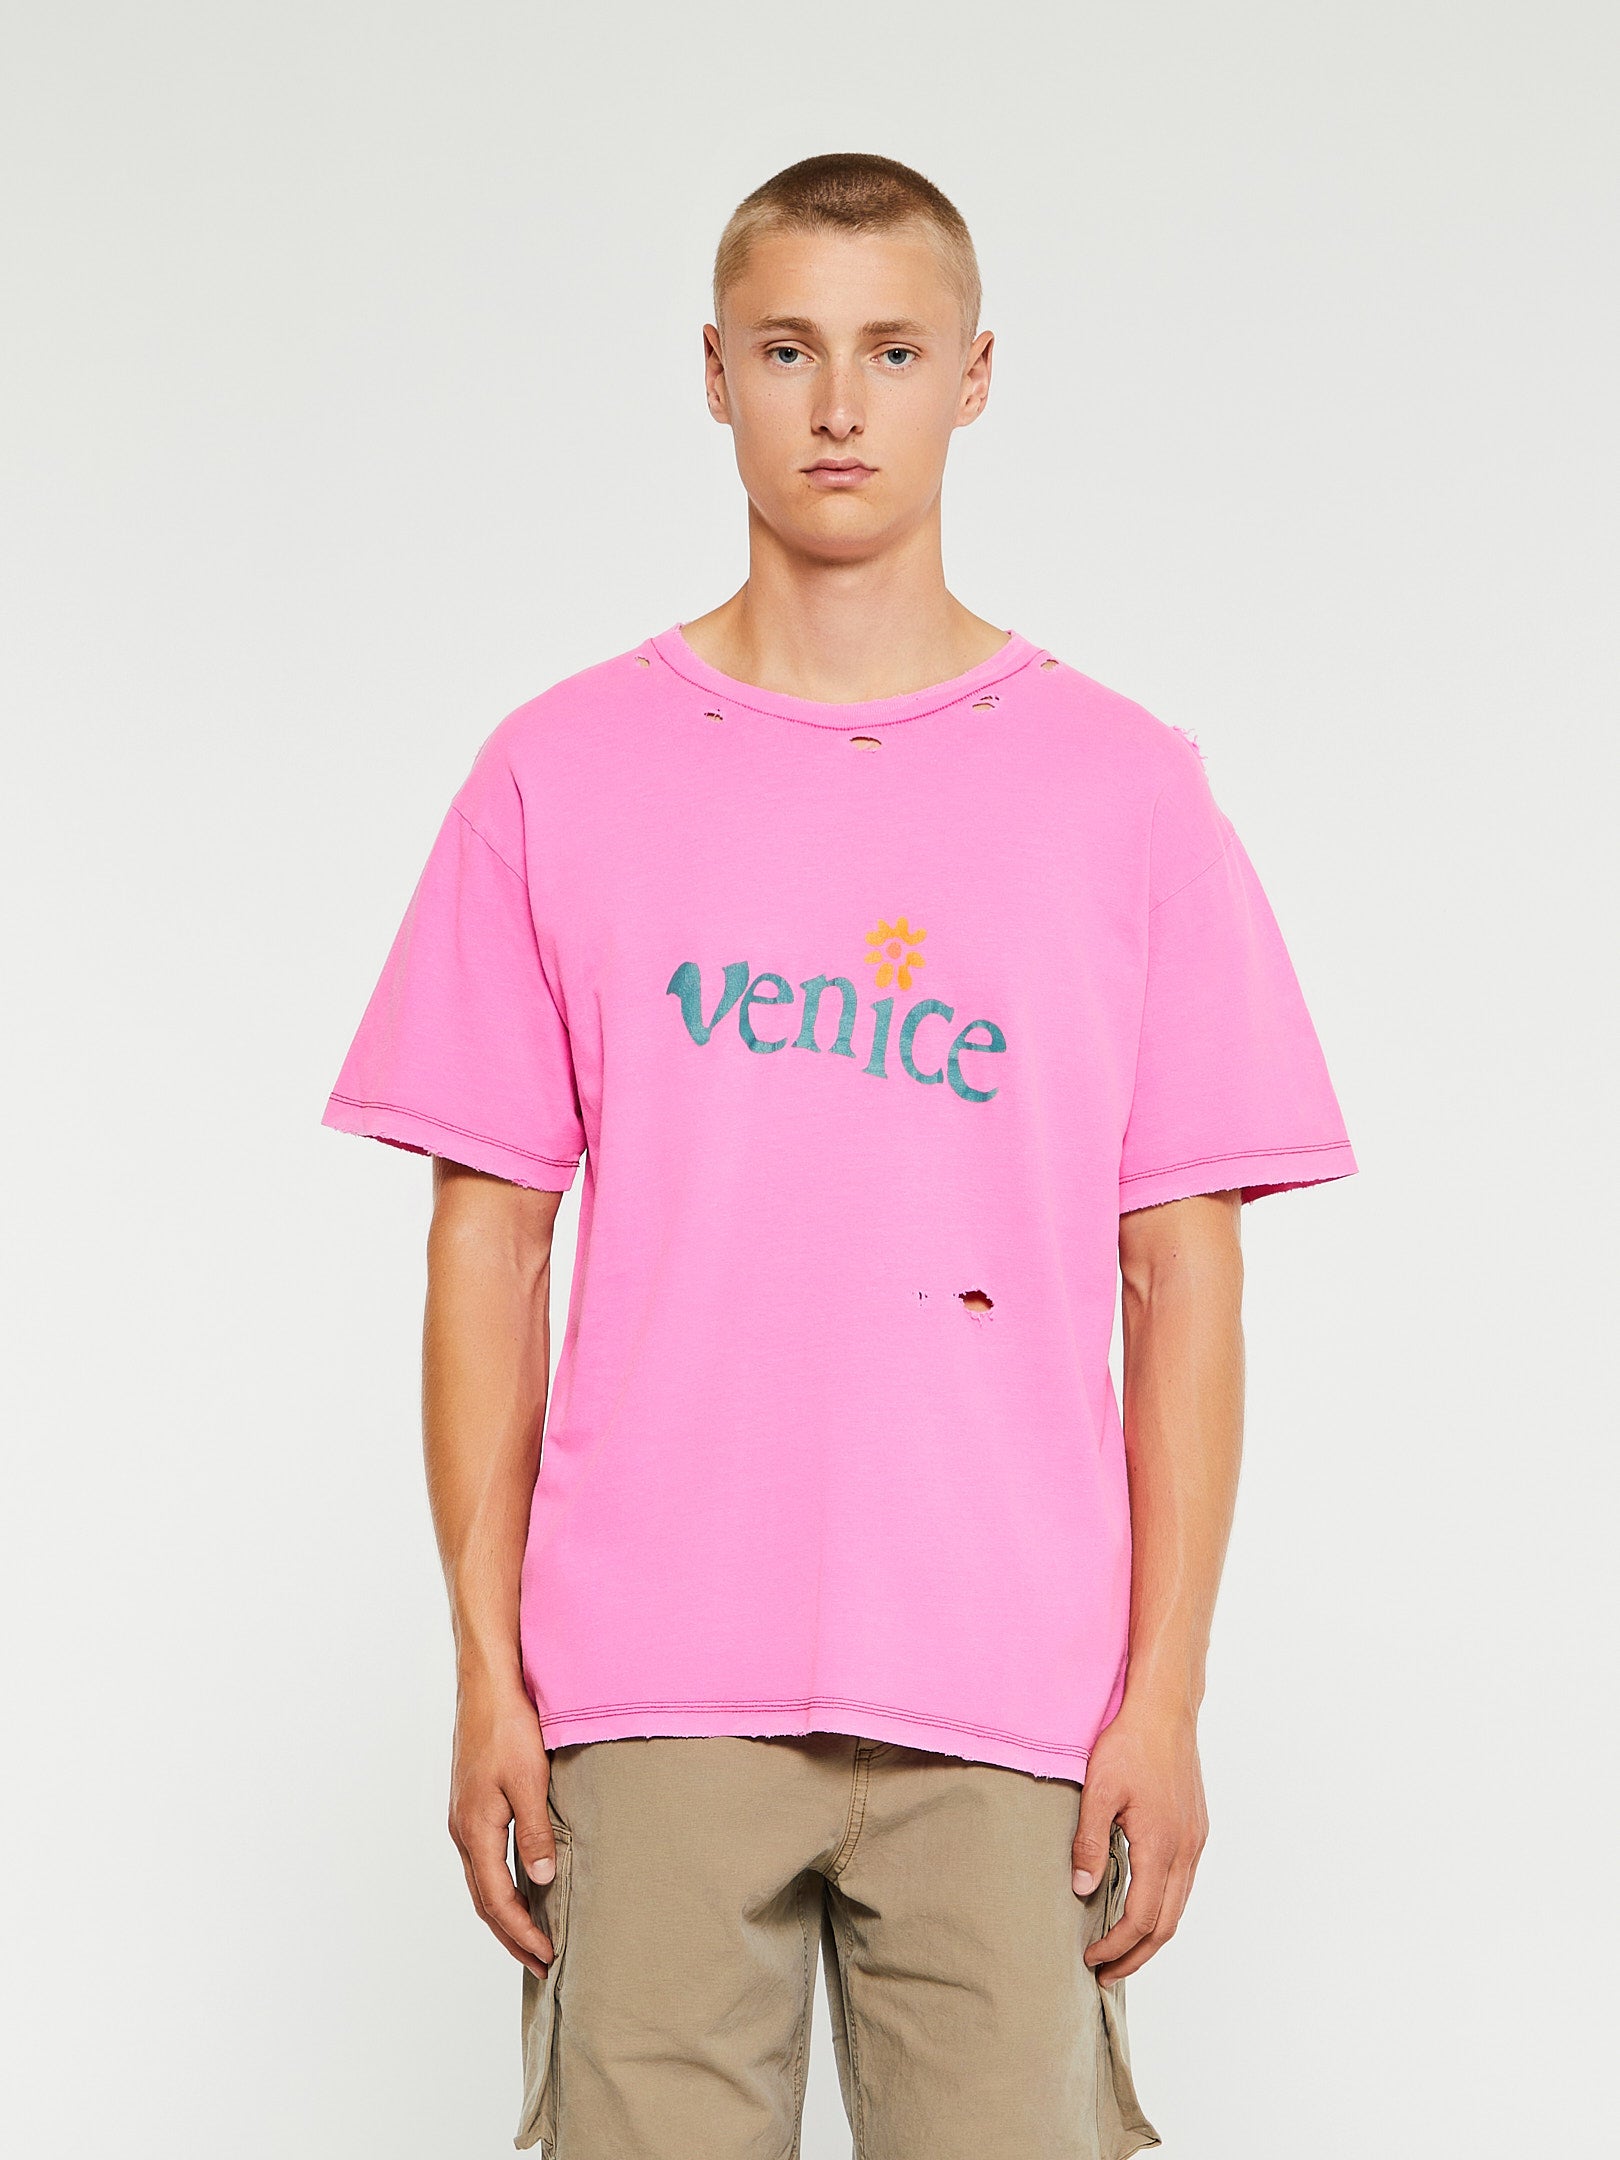 ERL - Venice T-shirt in Pink